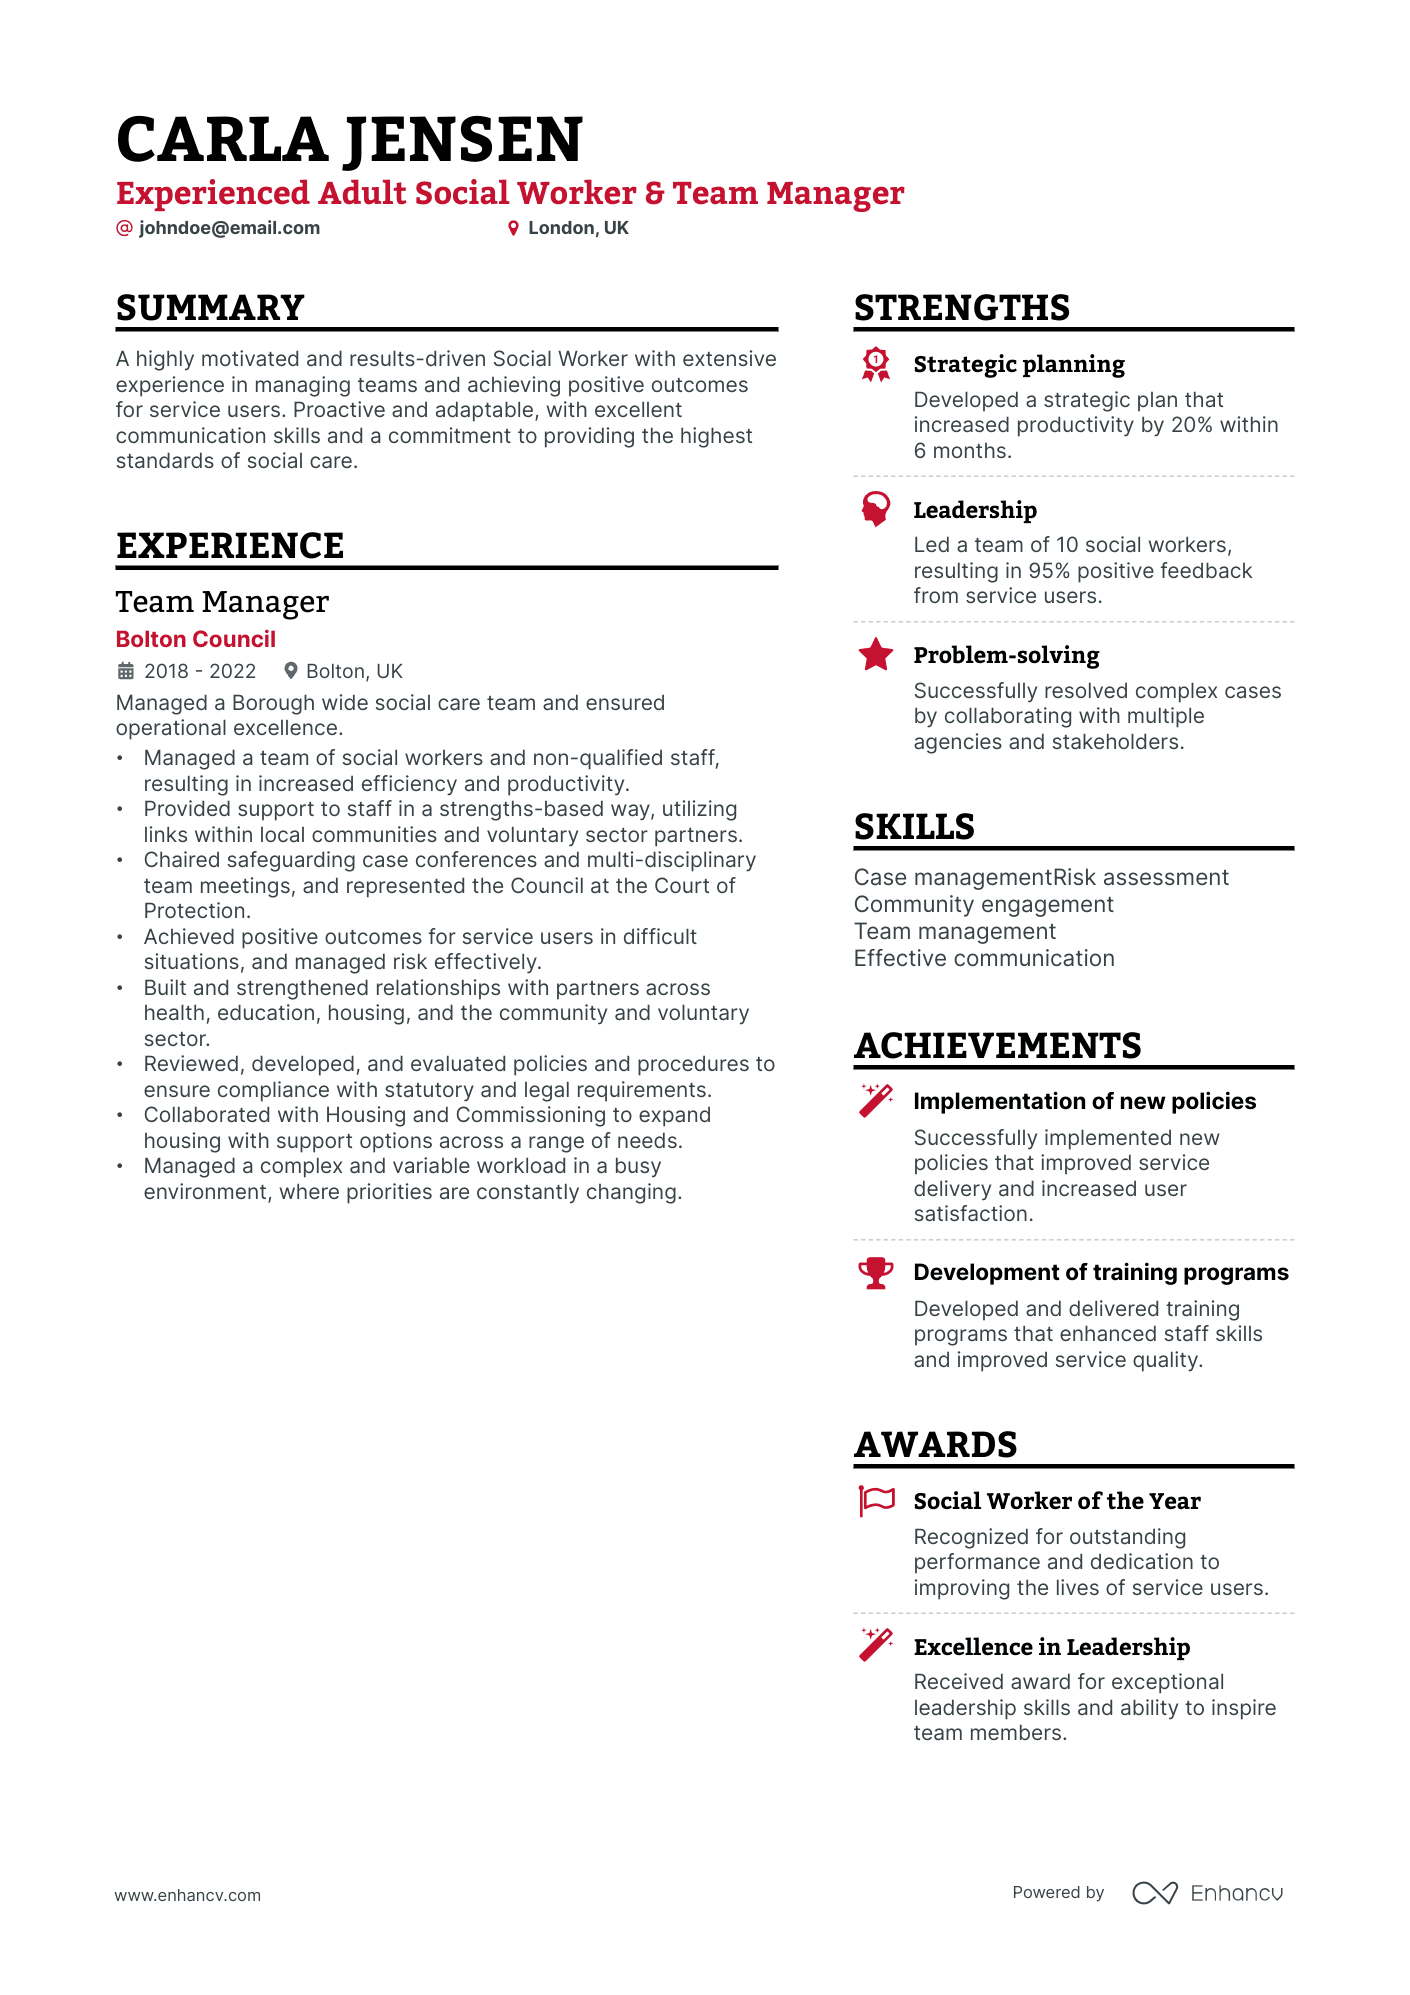 Team Manager resume example